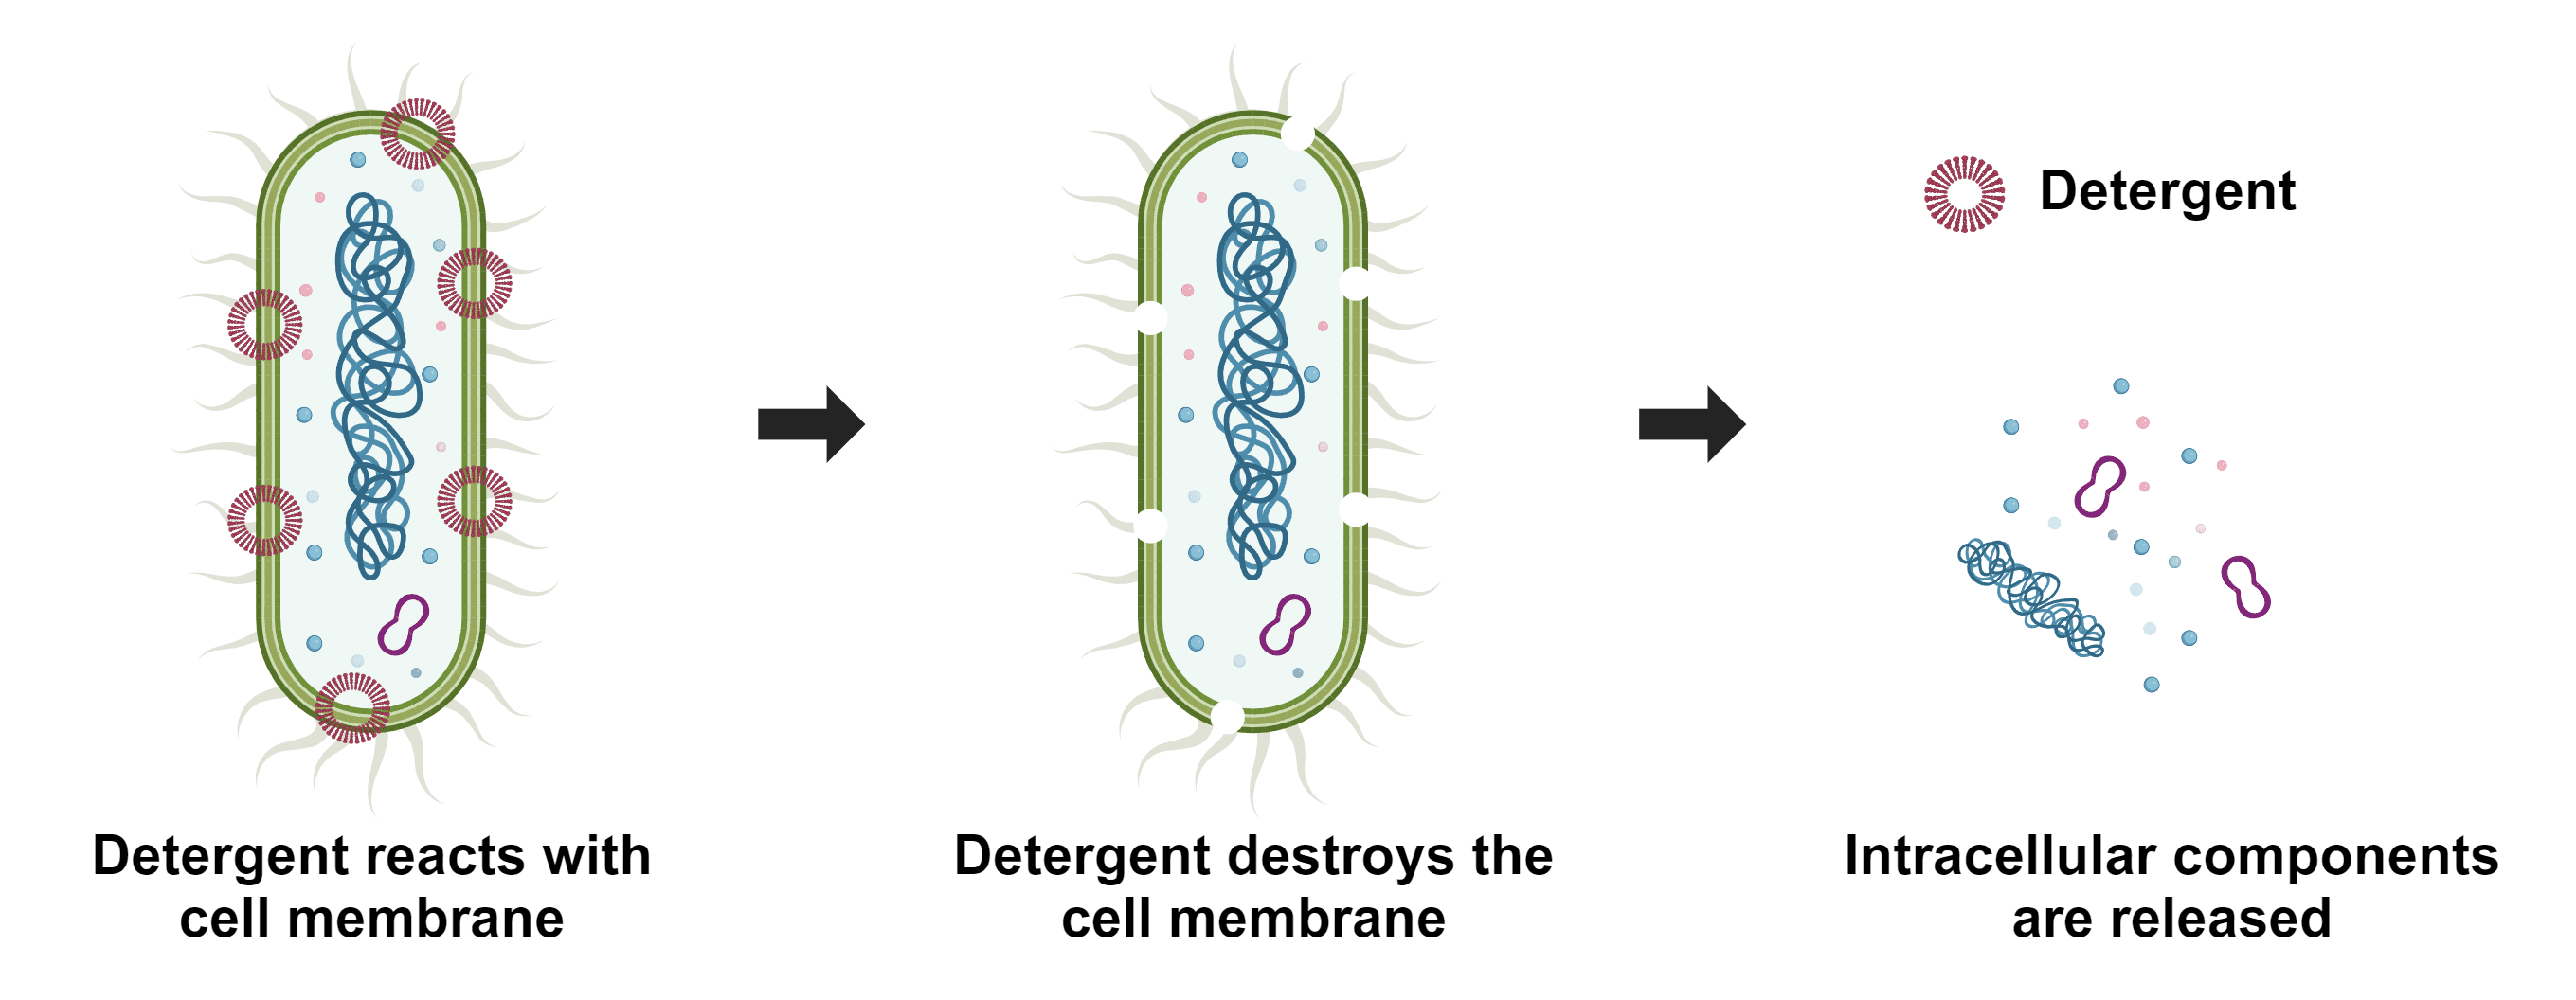 Bacterial cell lysis is the process of breaking down cells, which is commonly used to analyze cellular components like ribosomes, inclusion bodies, plasmids, nucleoids, and other small biomolecules. The membranes can be entirely or partially lysed, depending on the detergents used. ReadiUse™ reagents require minimal hands-on time, as this bacterial cell lysis buffer only requires a simple 5-fold dilution. It is widely used for lysing cells to quantify small biological molecules such as NAD(P)/NAD(P)H in bacteria.